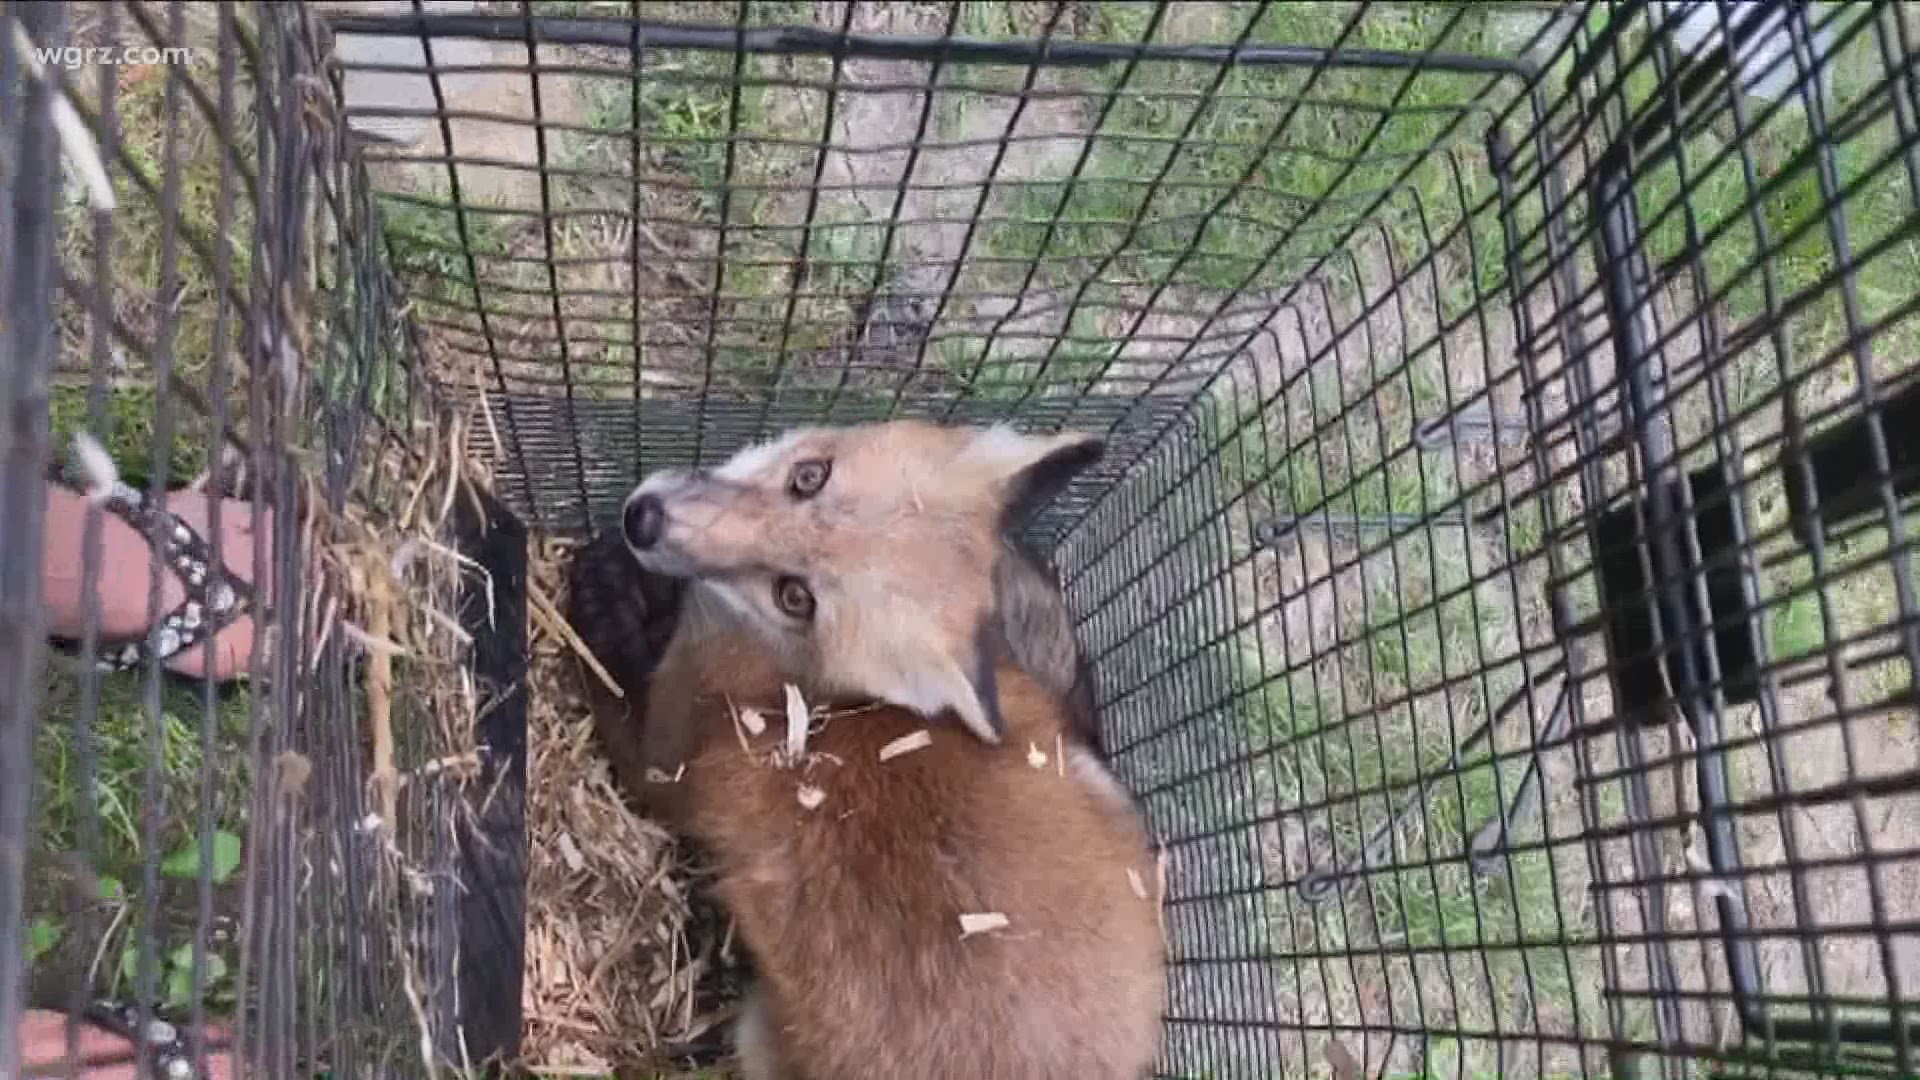 Local rehab gives foxes a second chance